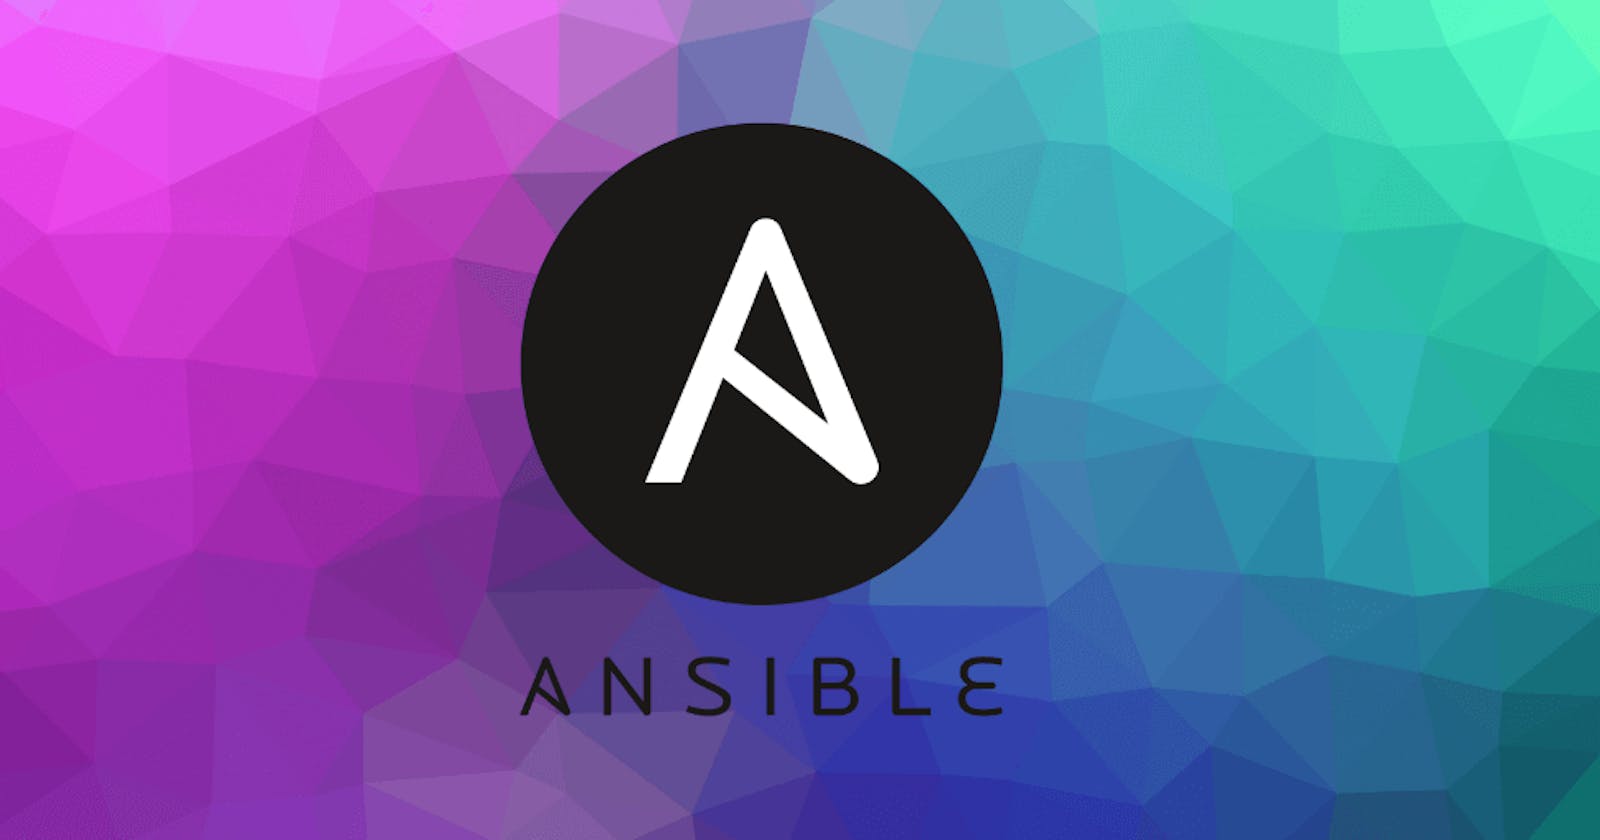 What's this Ansible?